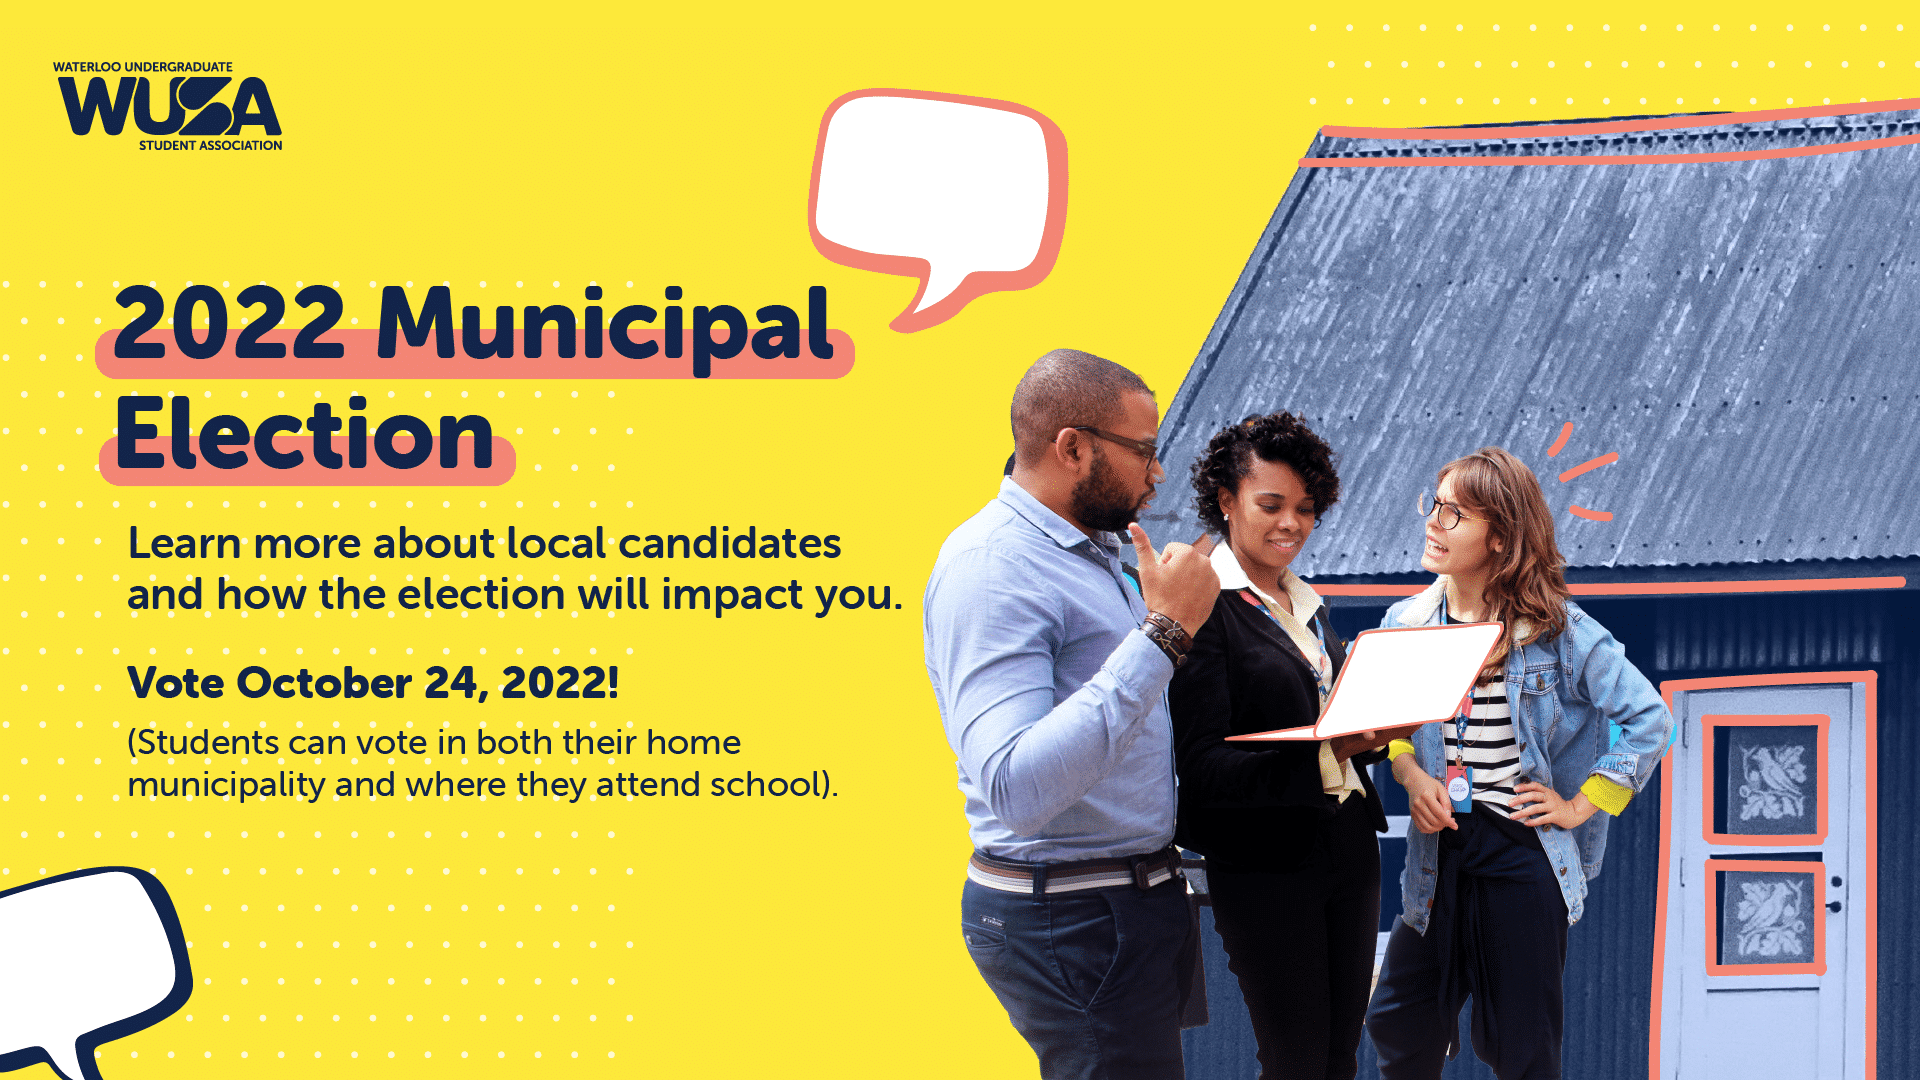 2022 Municipal Elections Student Your VOTE Matters! Waterloo